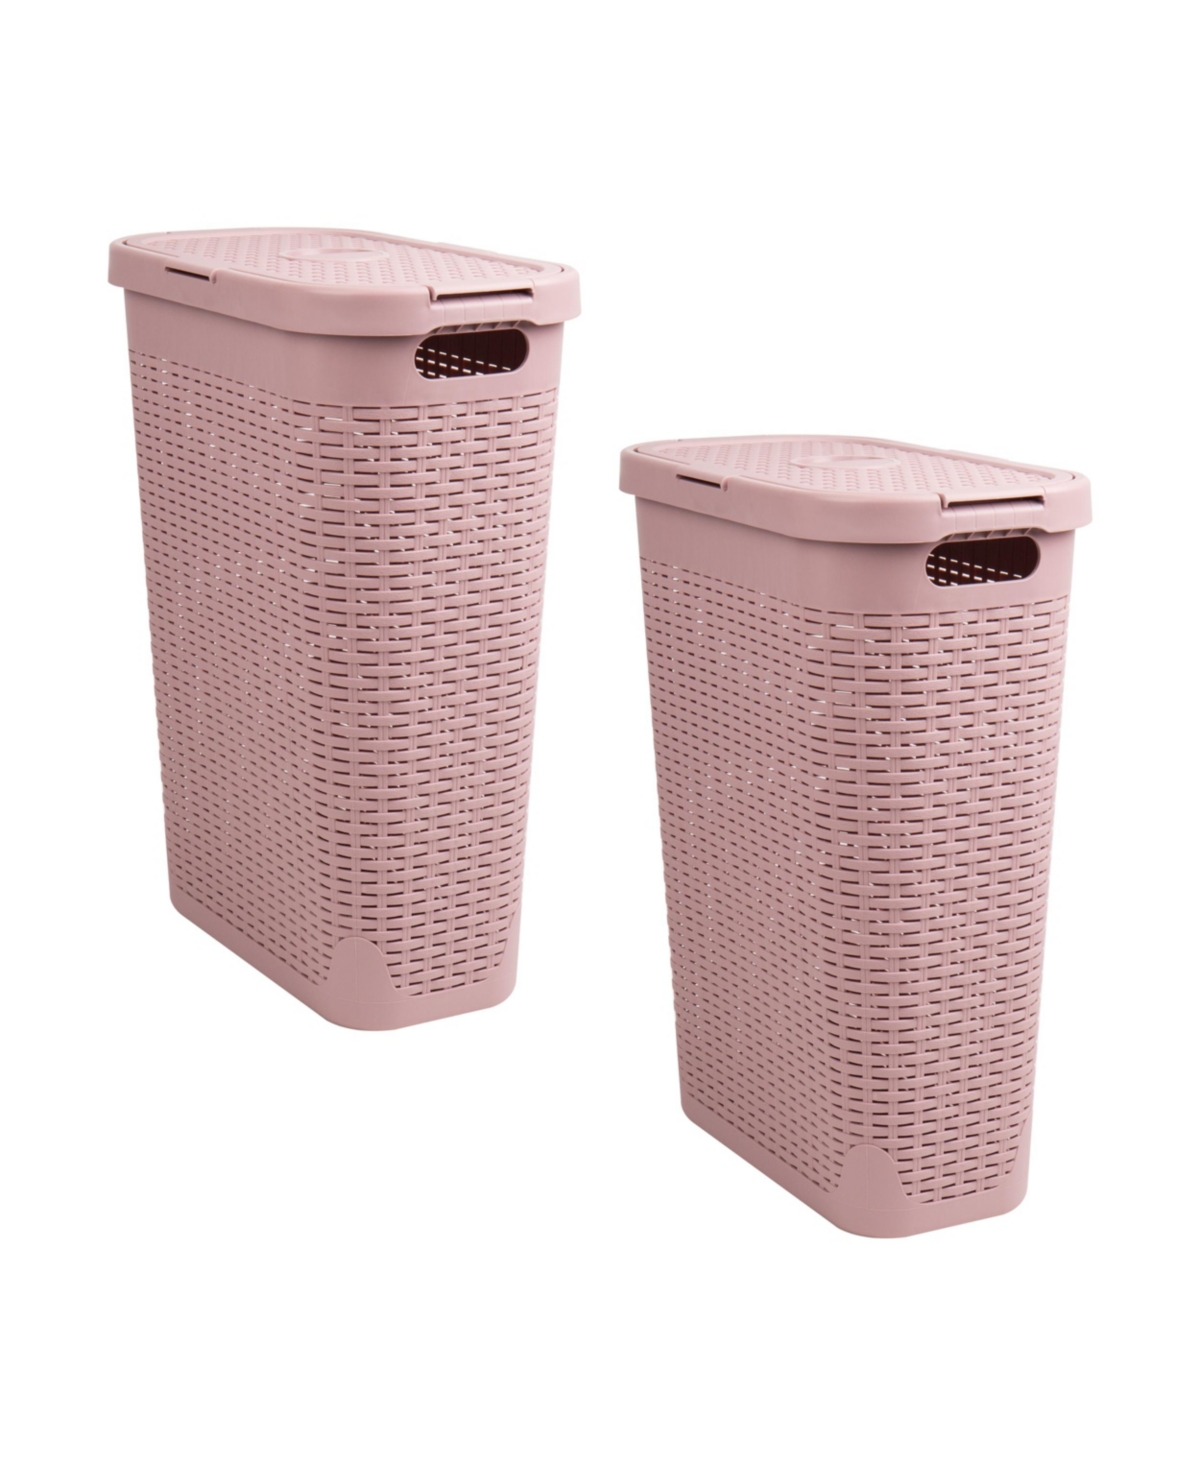 Mind Reader Basket Collection, Slim Laundry Hamper, 40 Liter 15kg, 33lbs Capacity, Cut Out Handles, Attached Hin In Pink